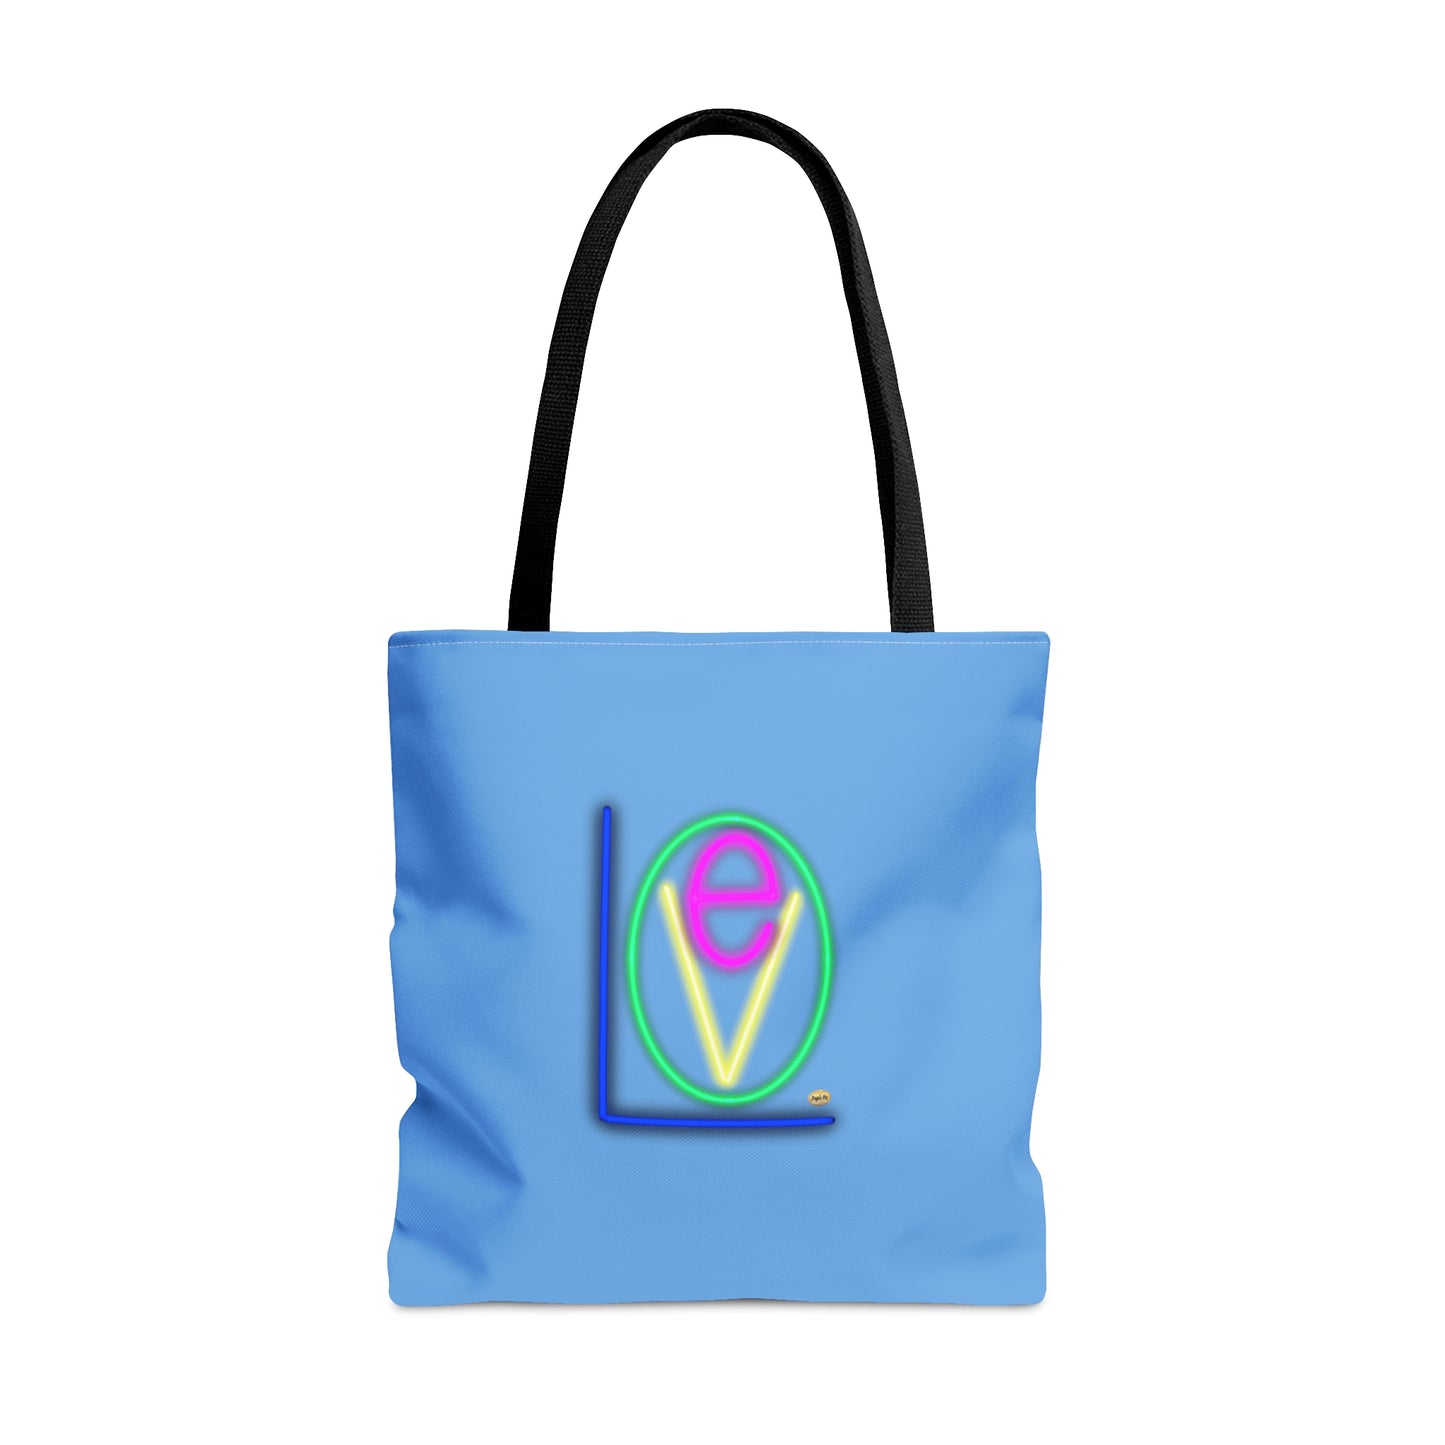 NEON Navy Love Tote  Gift for Mom Present for Daughter Gift for Wife Present Girl Friend Birthday